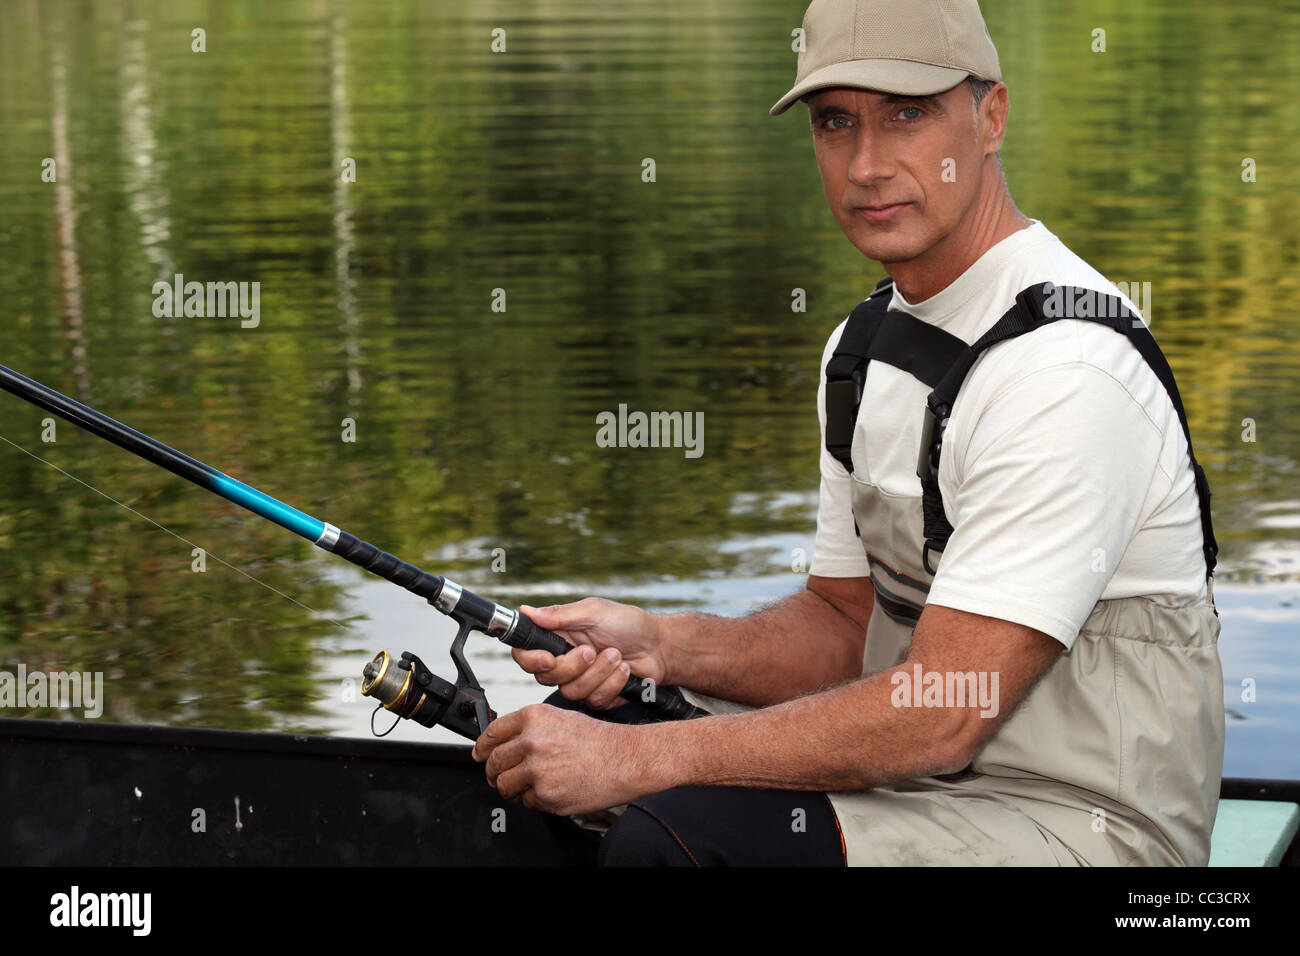 45 years old man on a boat and fishing Stock Photo